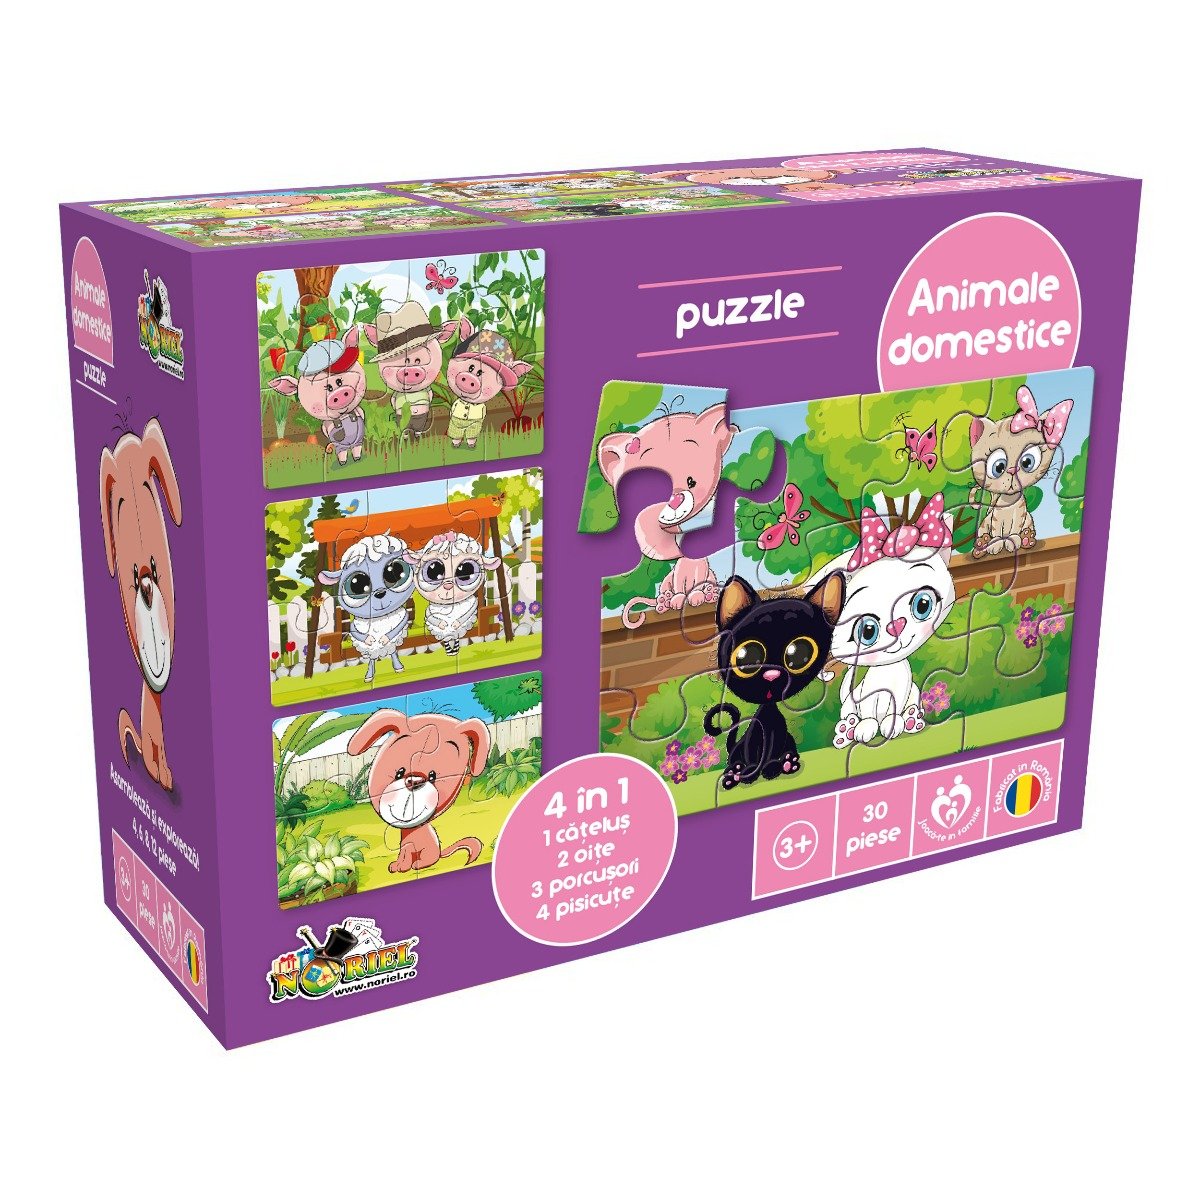 Puzzle 4 in 1 Noriel – Animale domestice (30 piese) (30